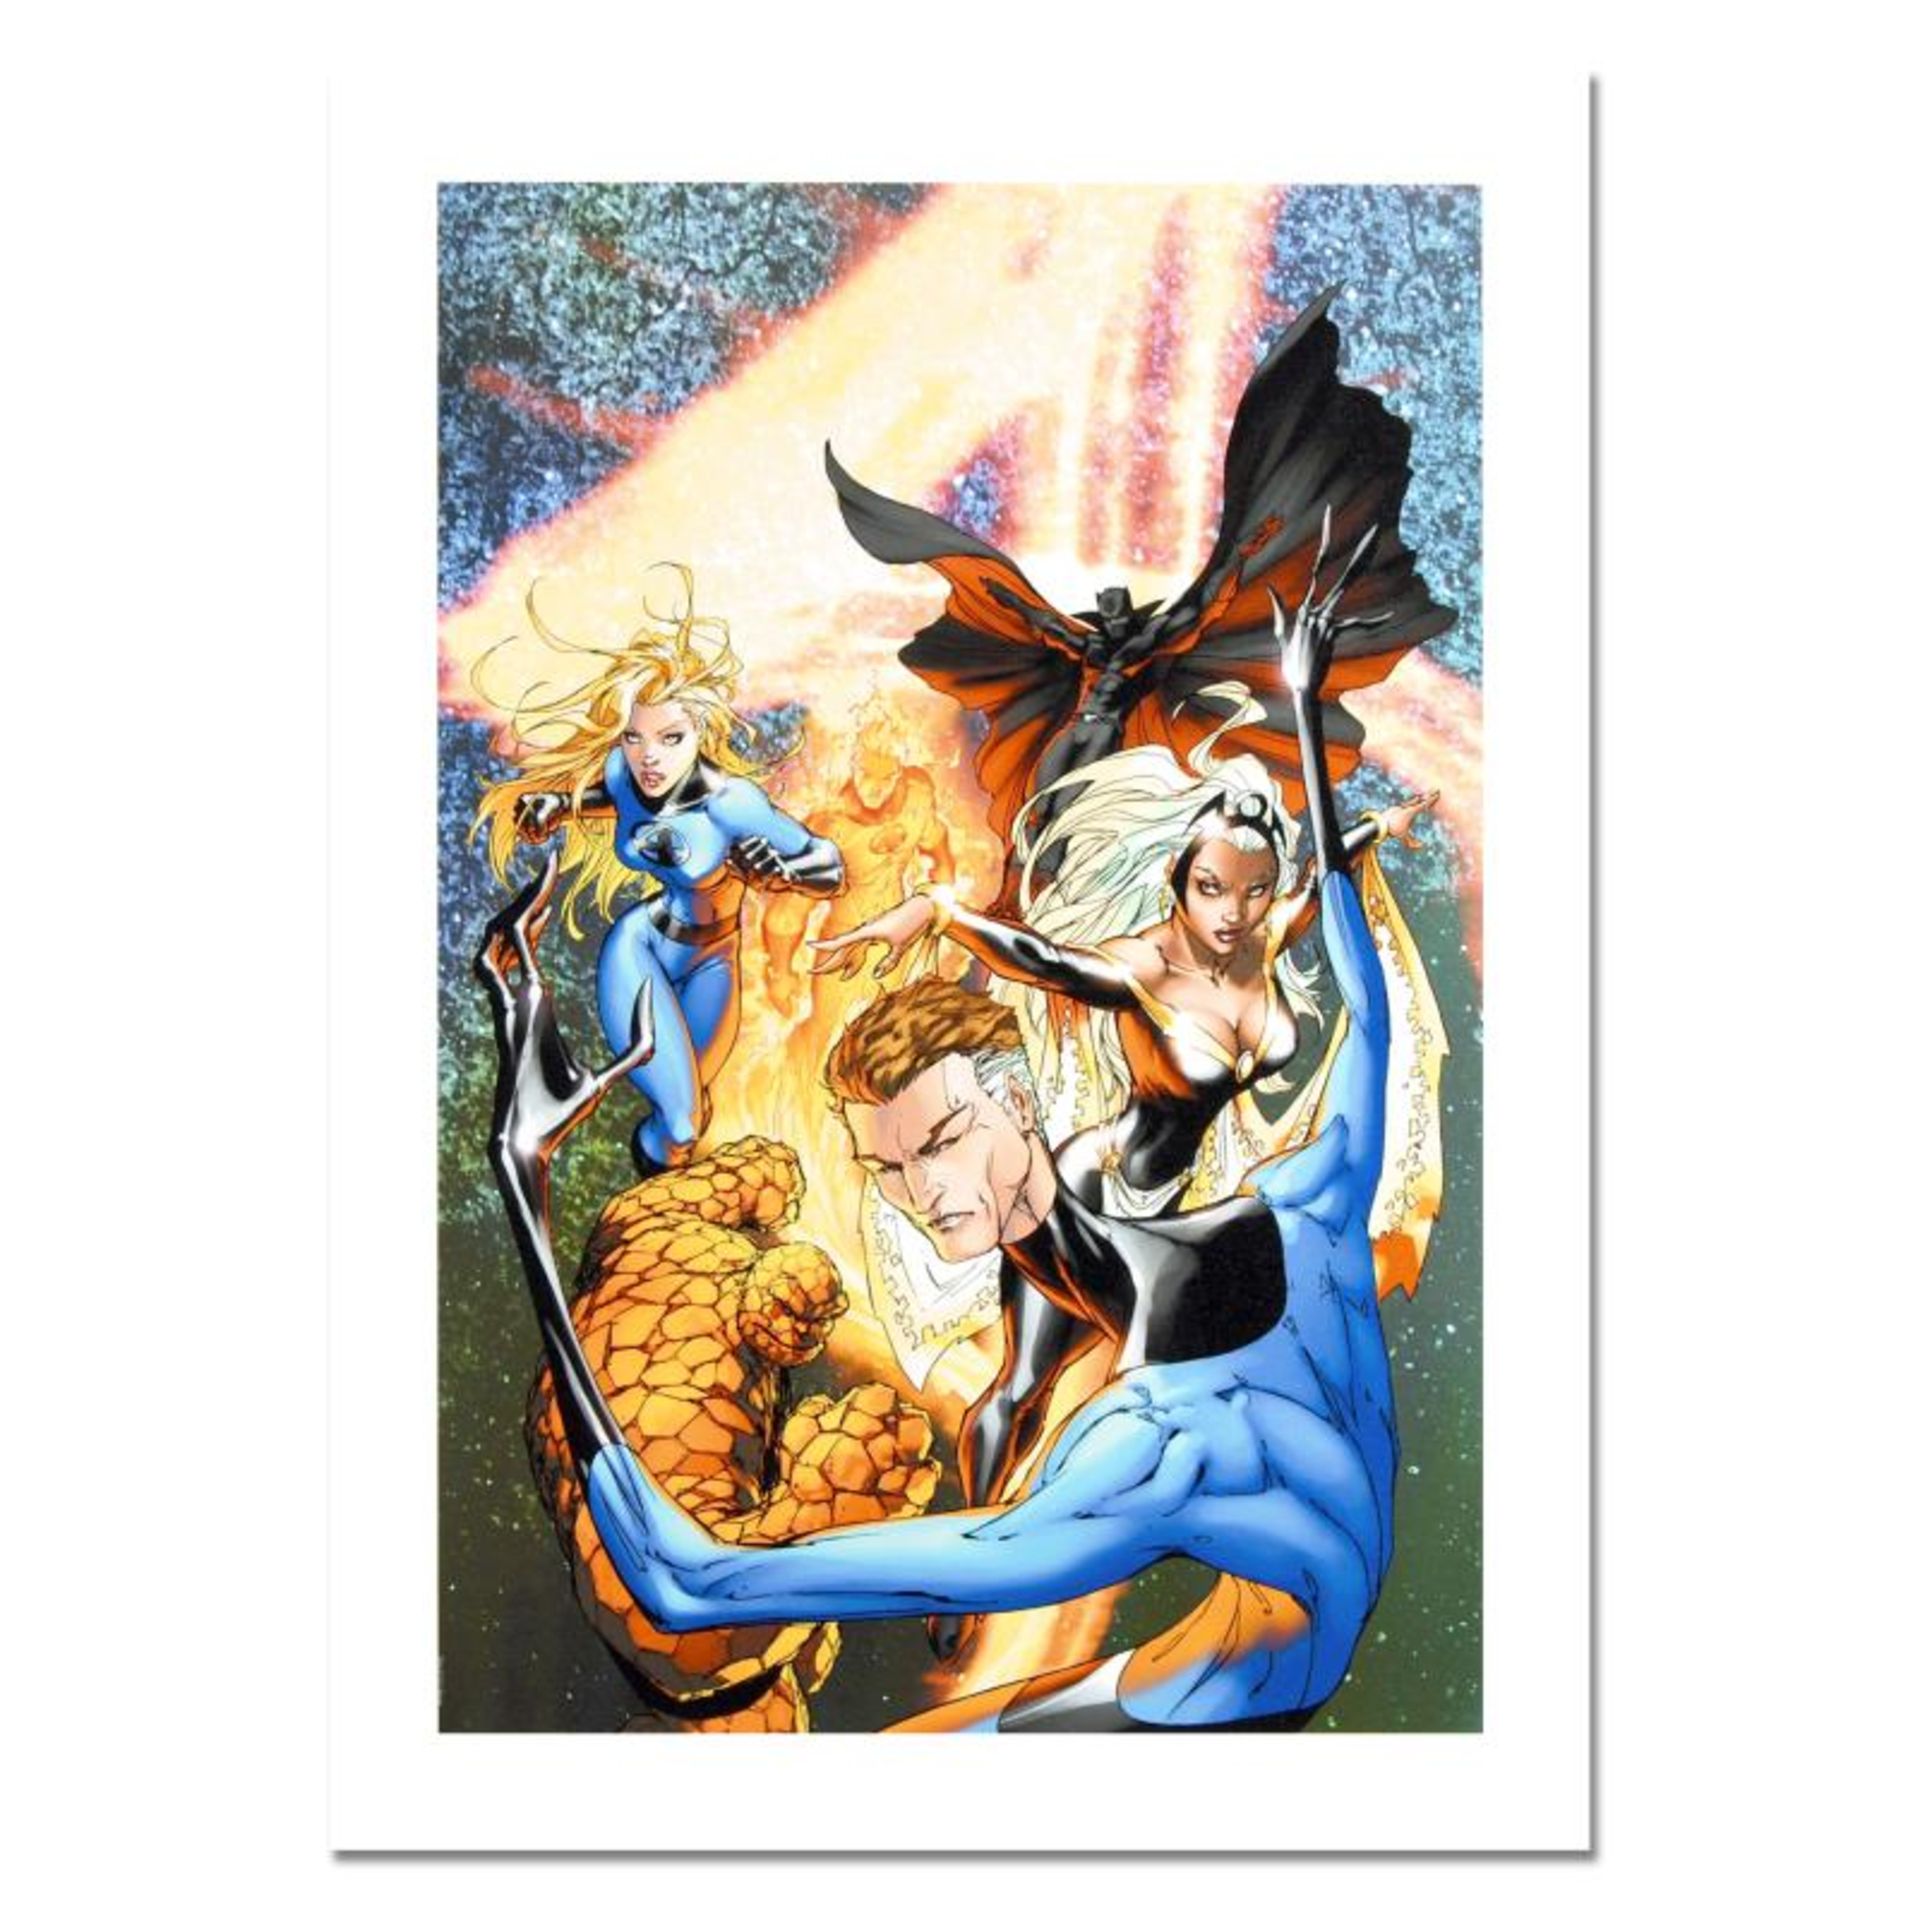 Marvel Comics, "Fantastic Four #548" Numbered Limited Edition Canvas by Michael